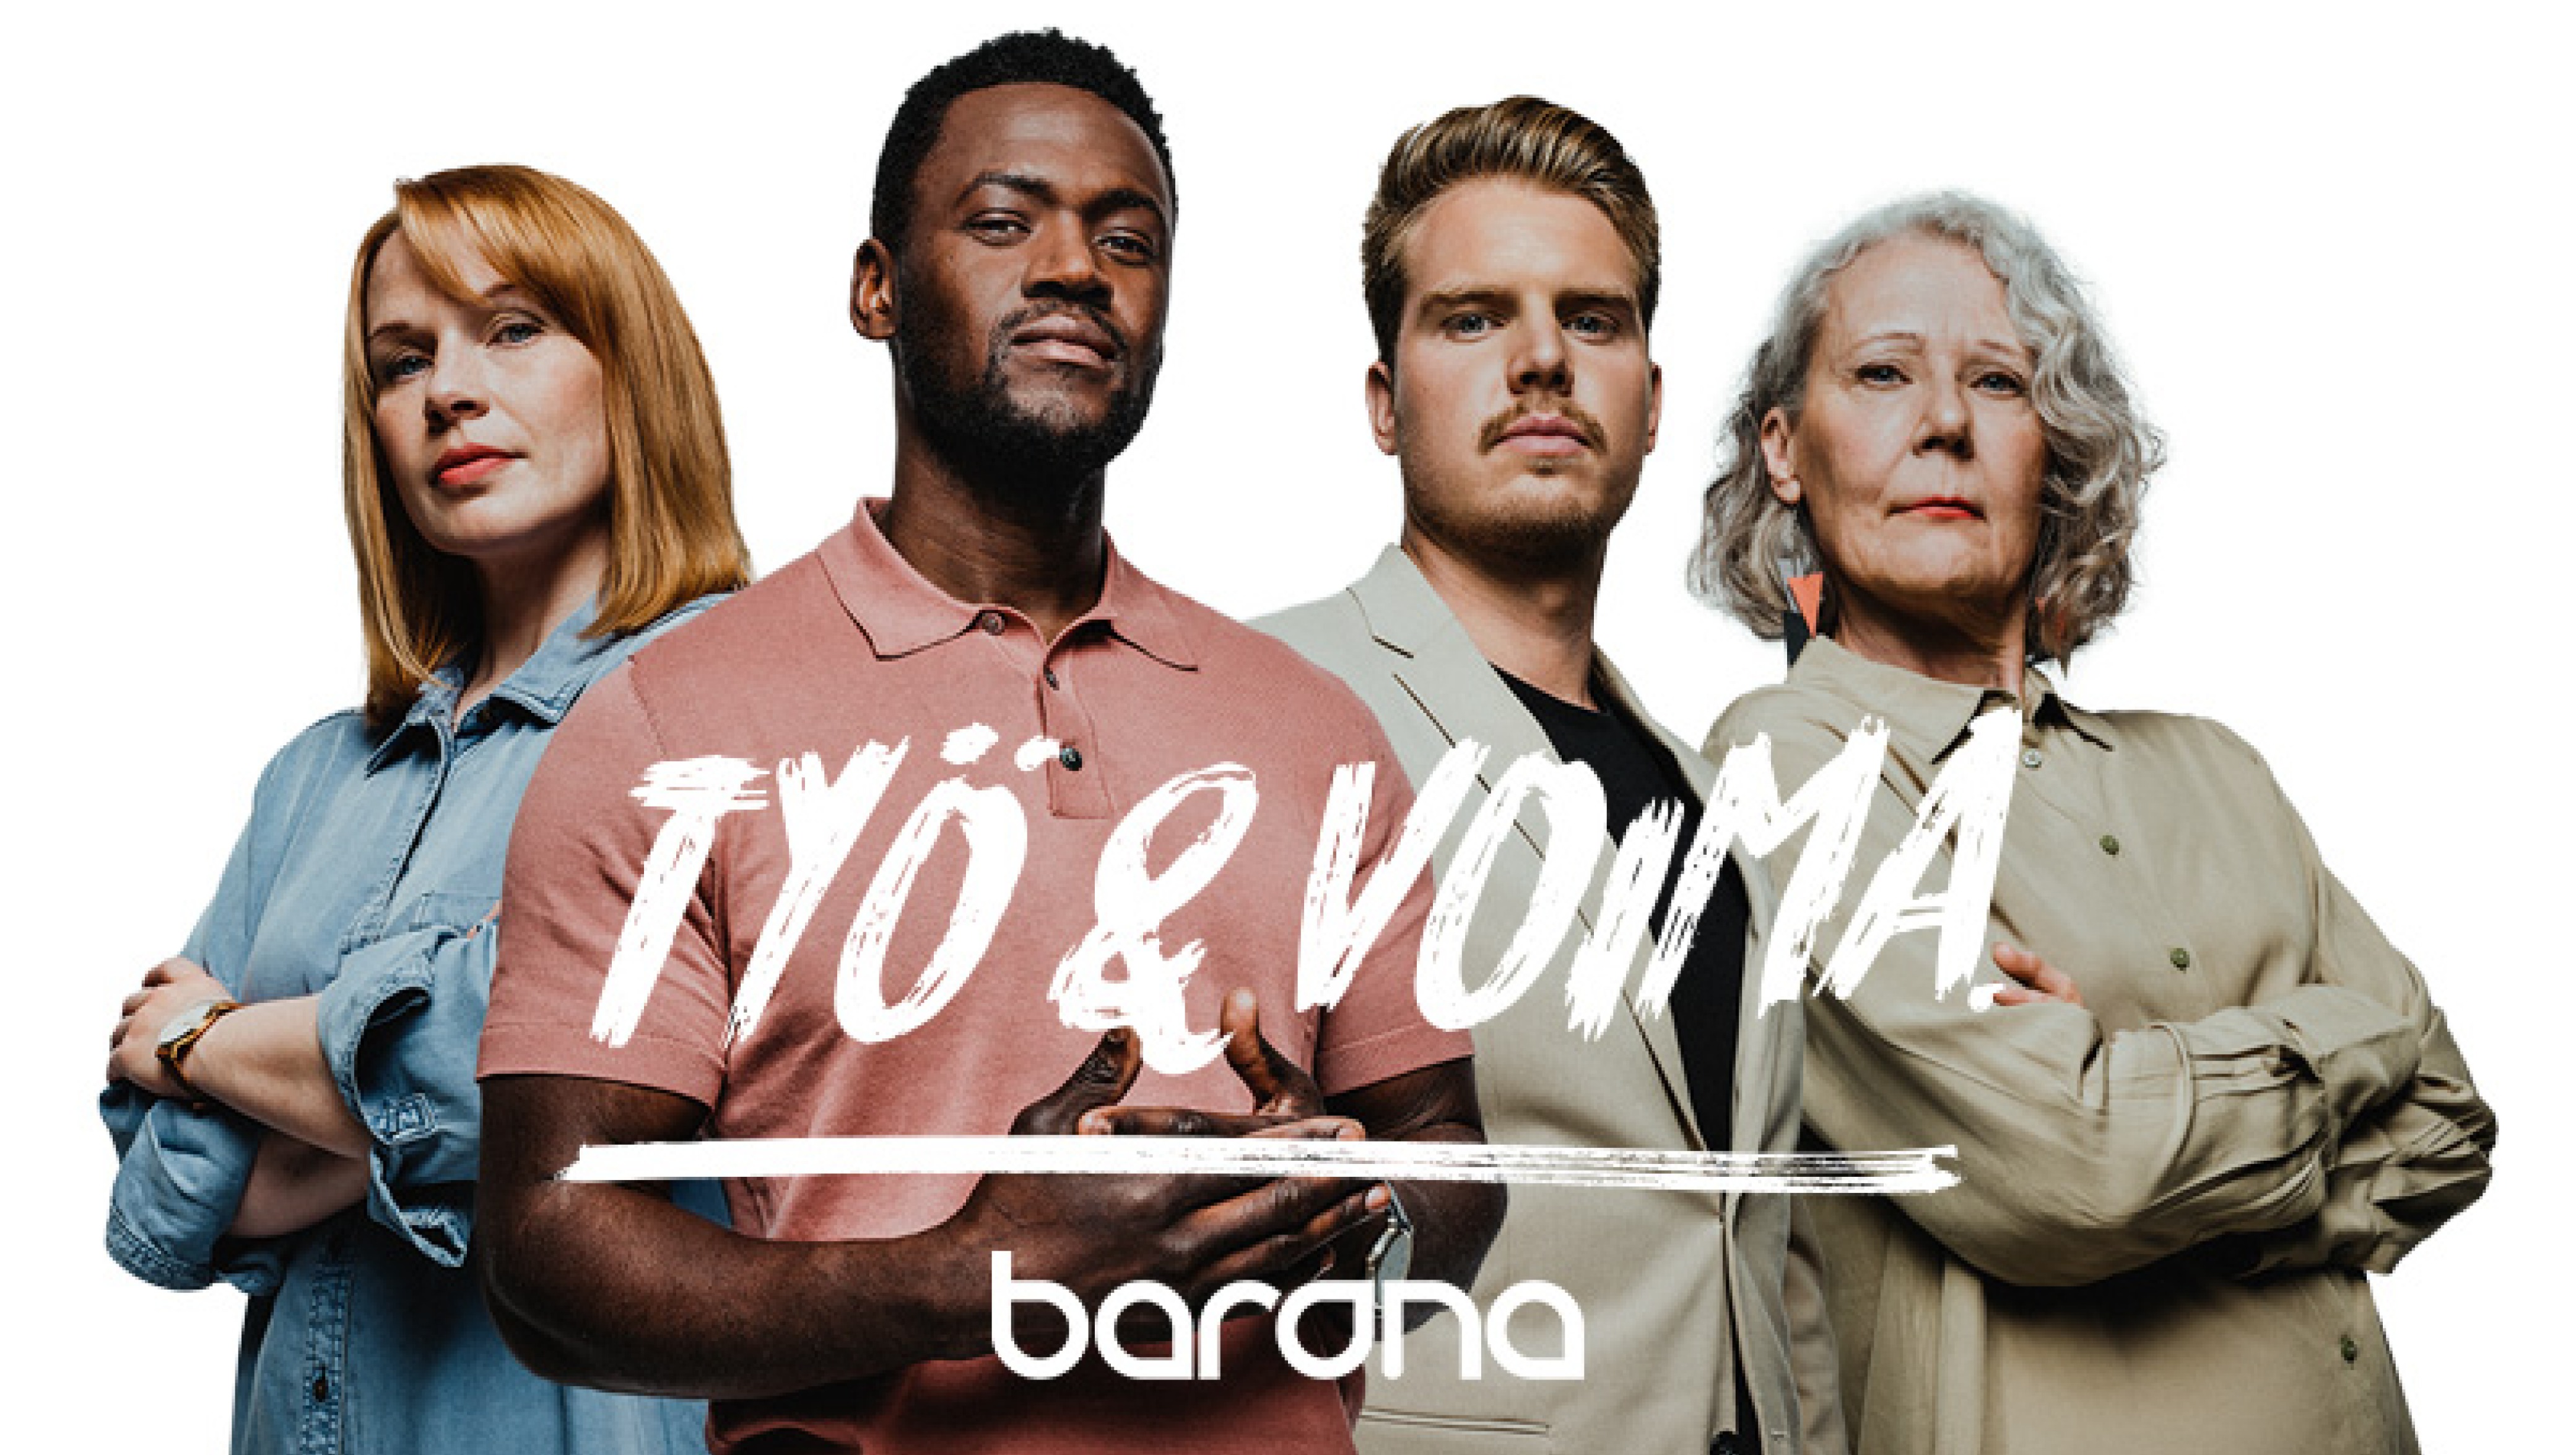 Työ & voima campaign main image with 4 different people